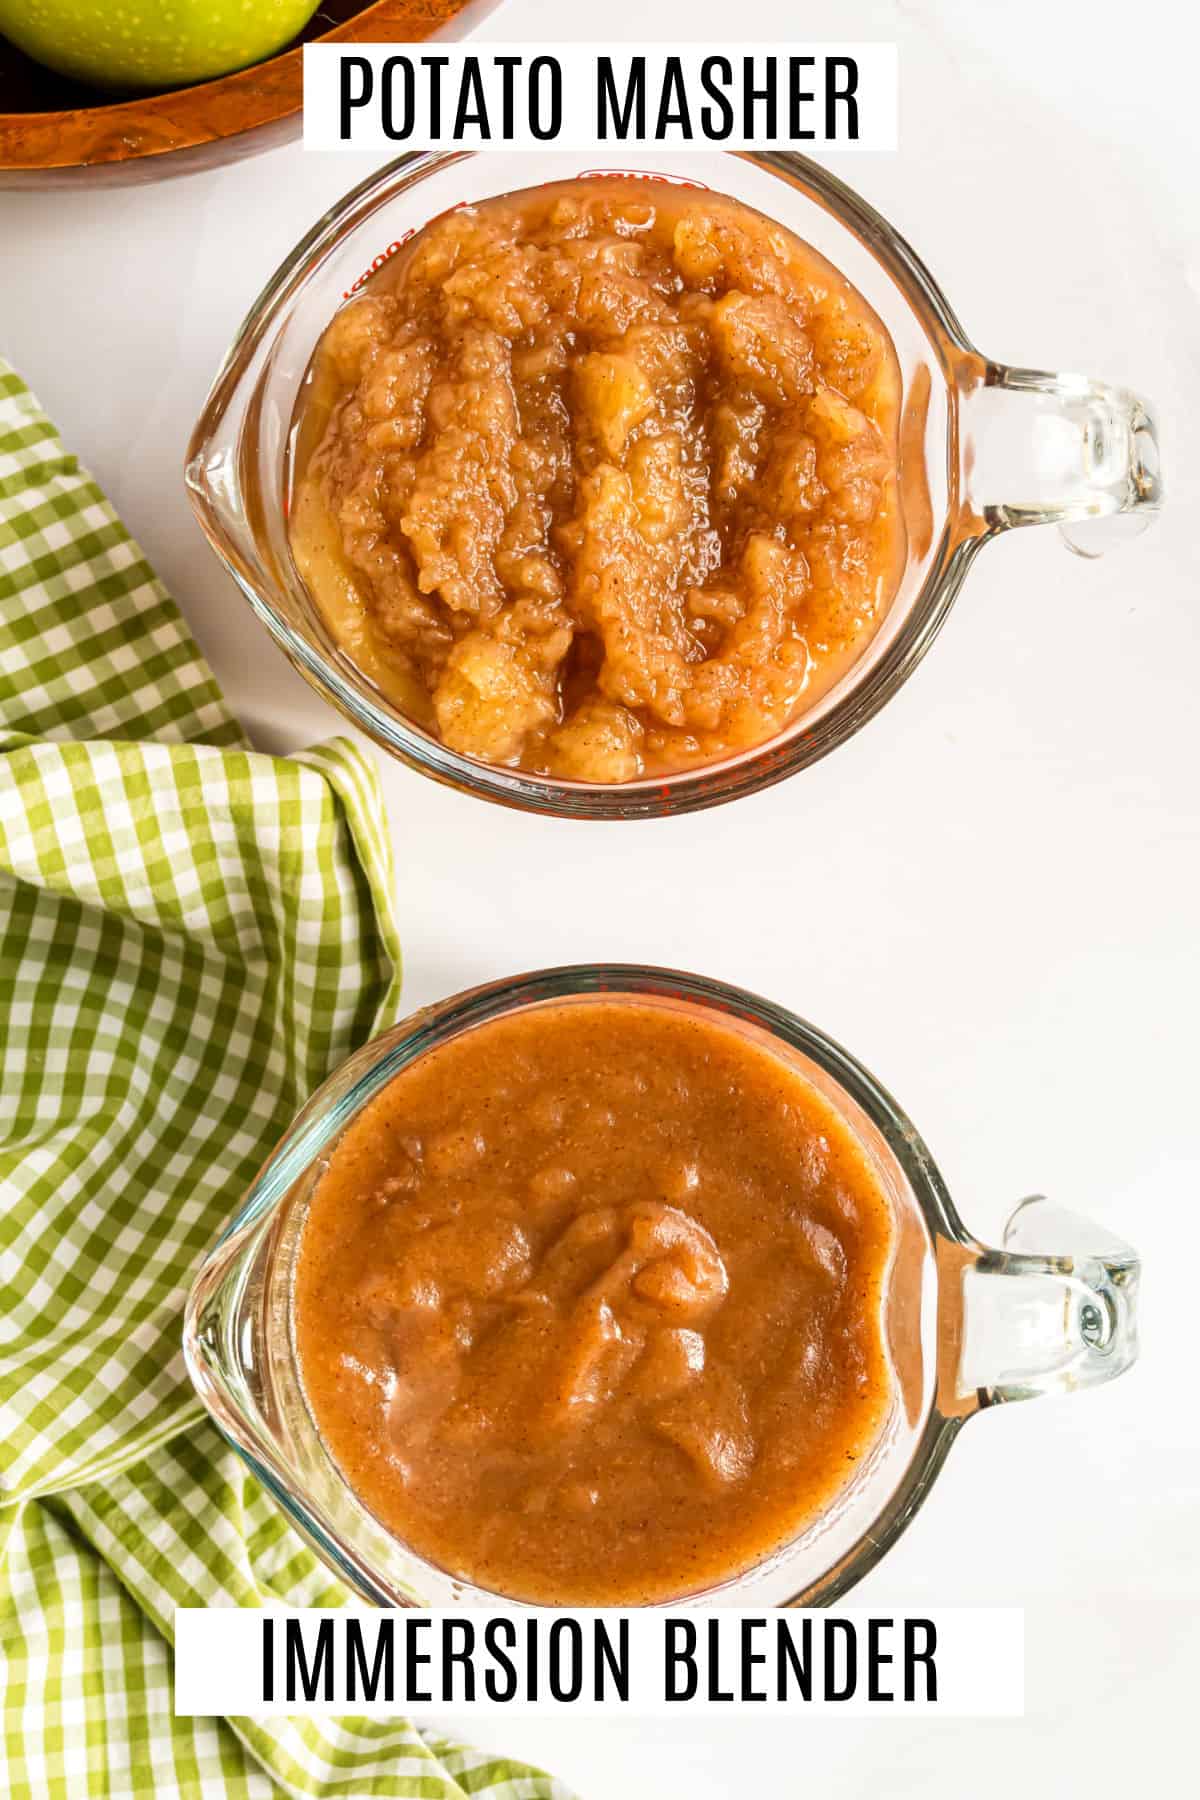 Two versions of applesauce showing different consistencies.